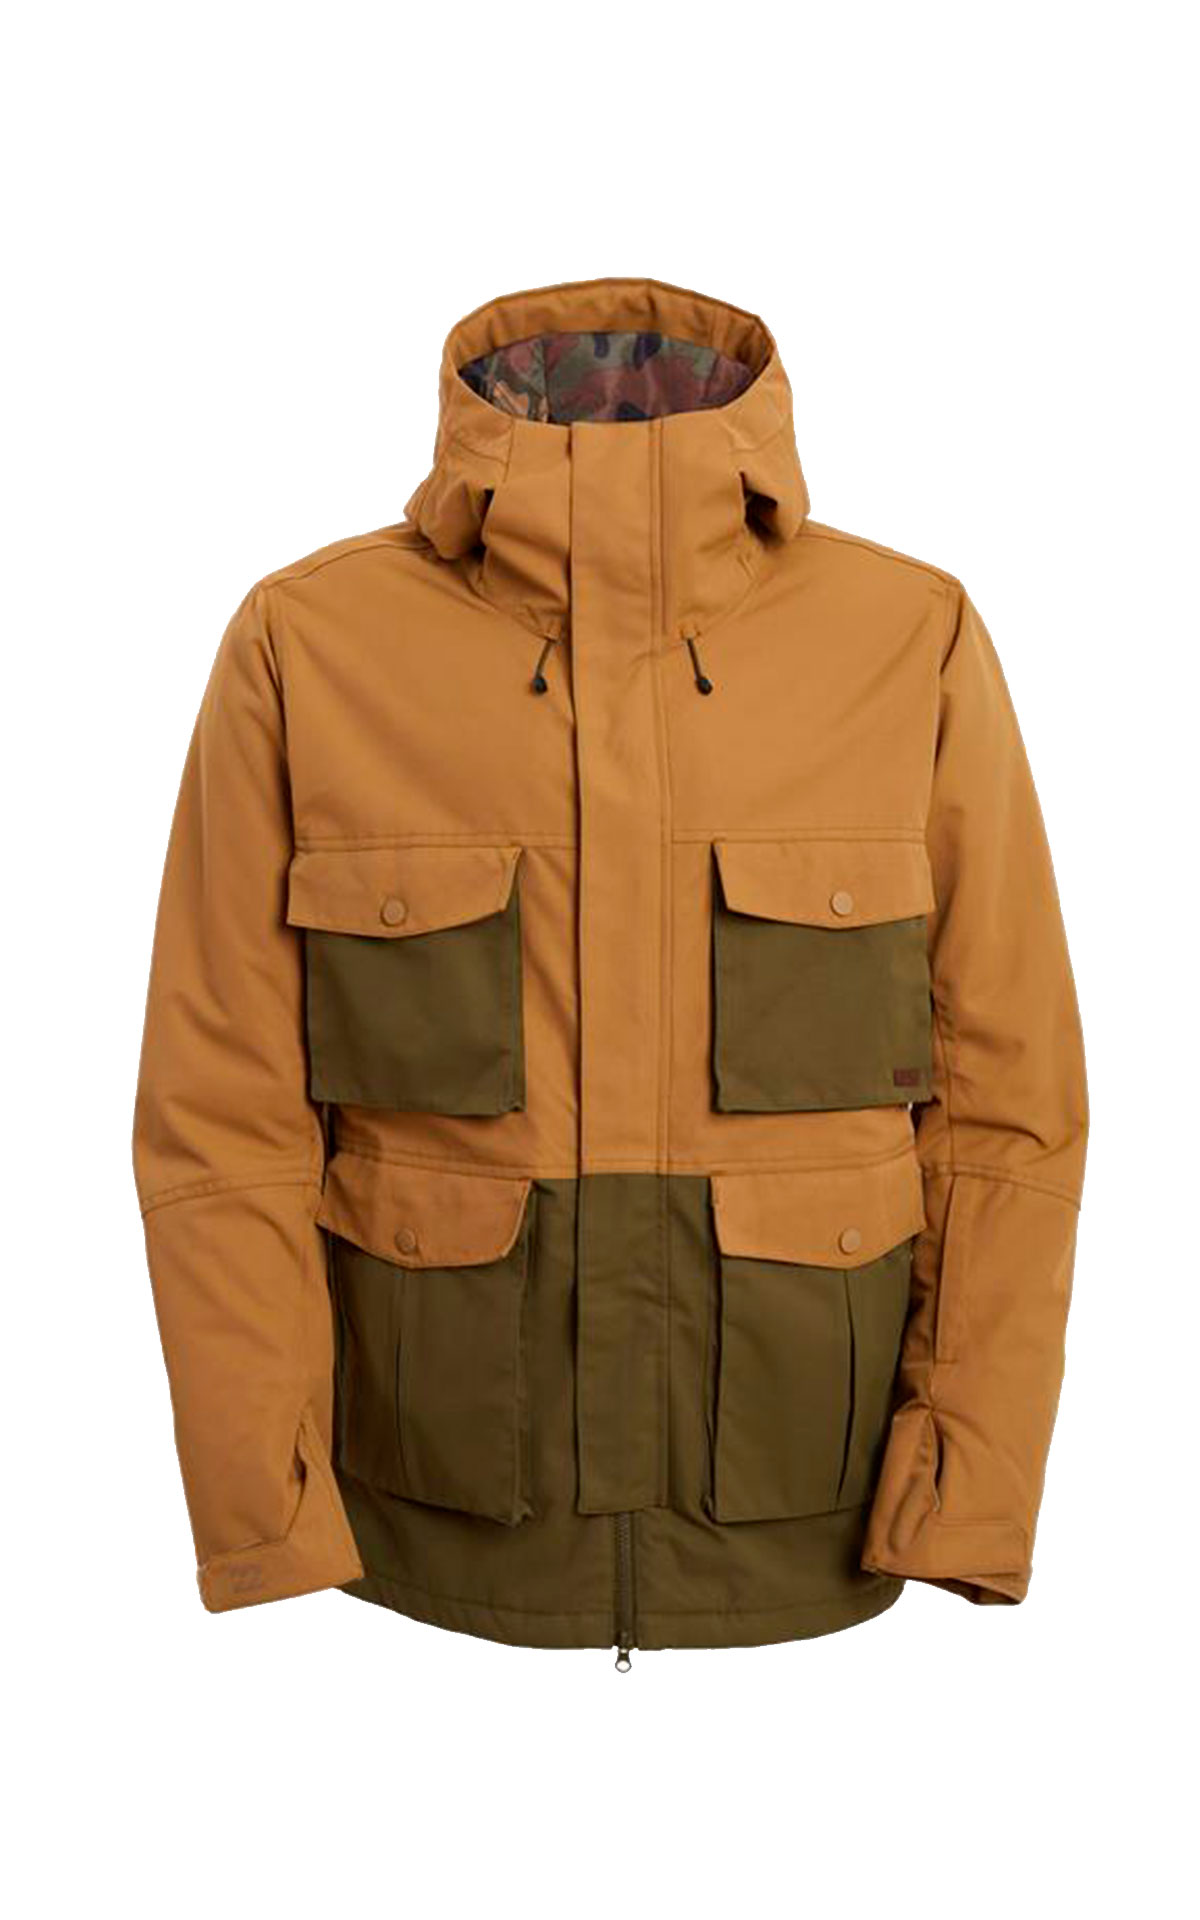 Camel anorak with pockets Boardriders